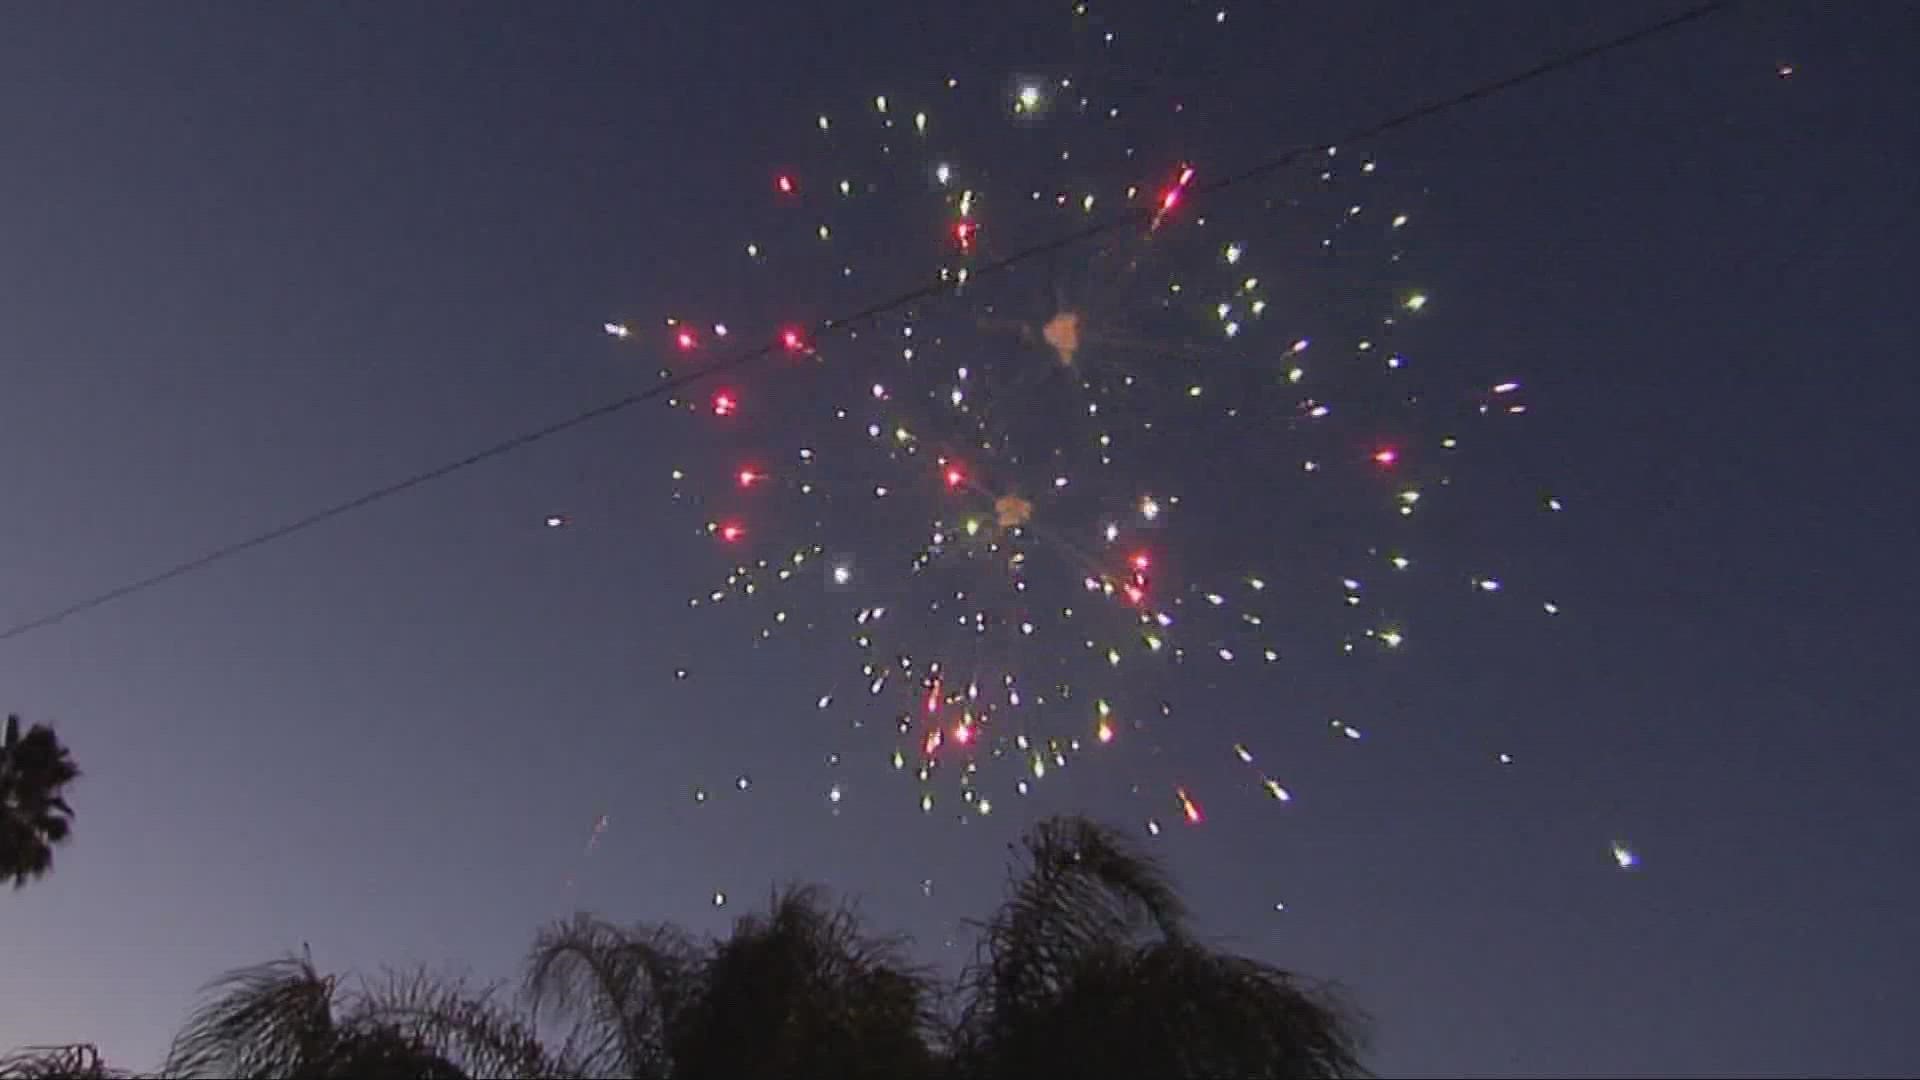 A change in state law will allow the use of consumer fireworks. Lynna Lai got reaction from cities and businesses.